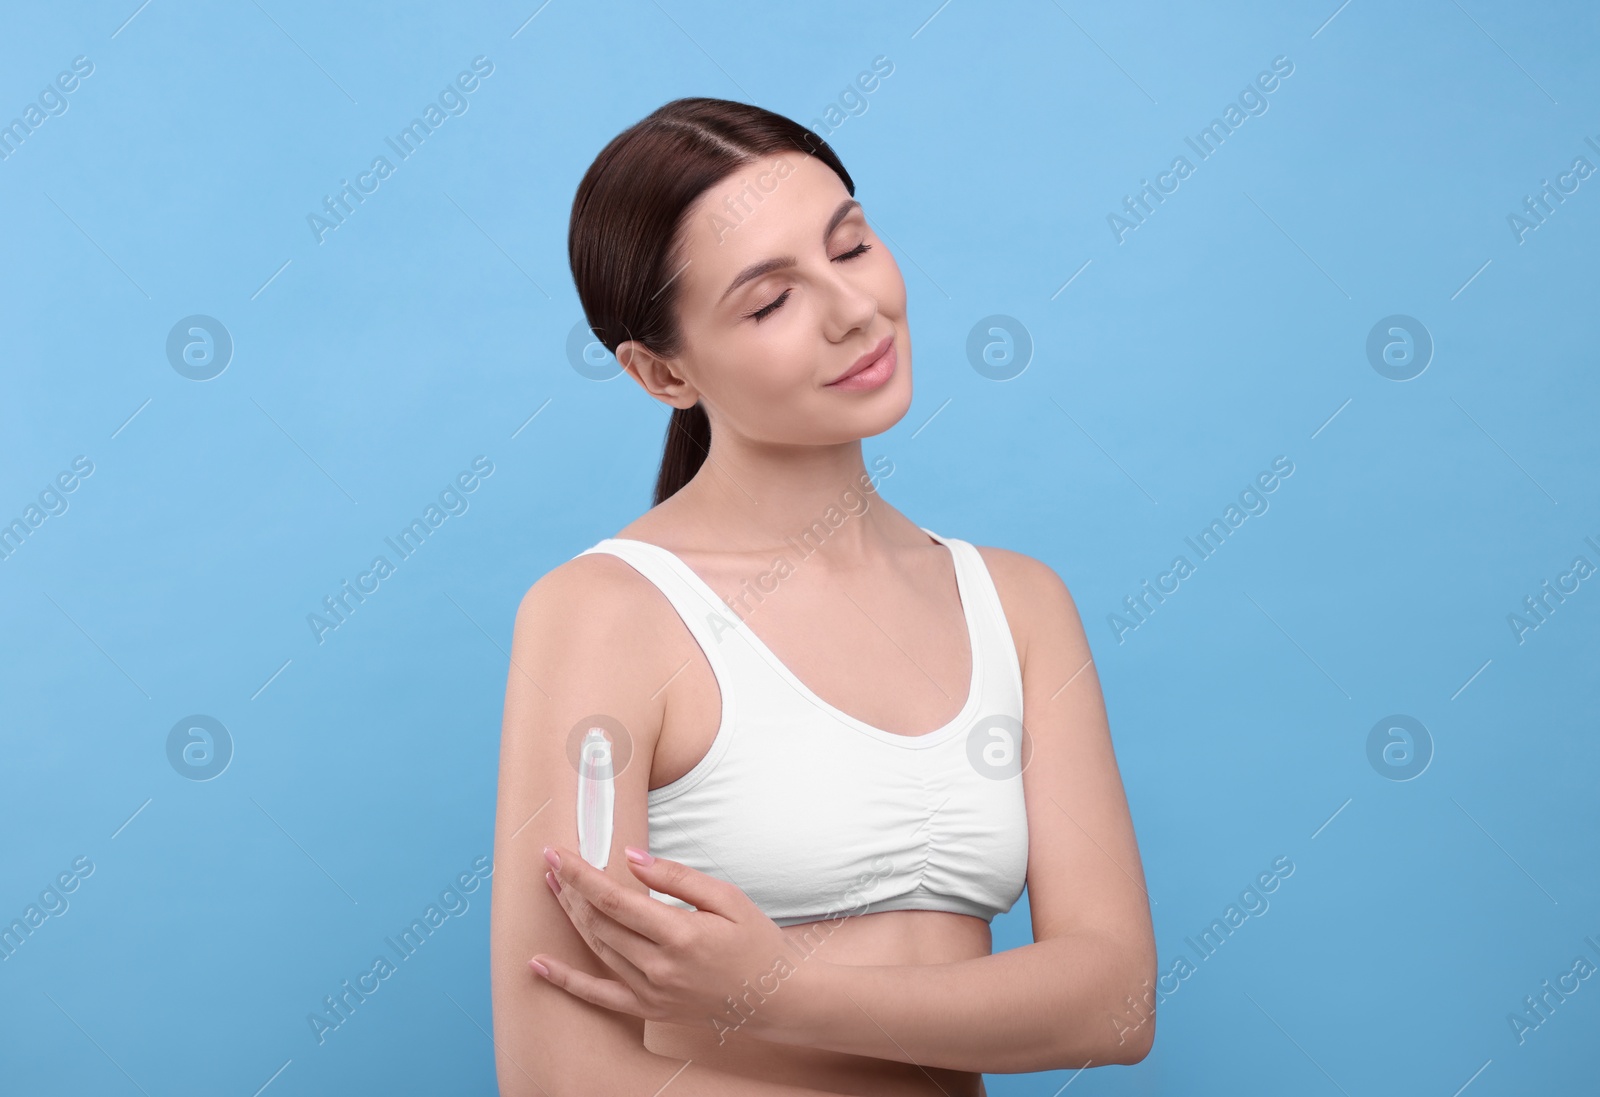 Photo of Beautiful woman with smear of body cream on her arm against light blue background